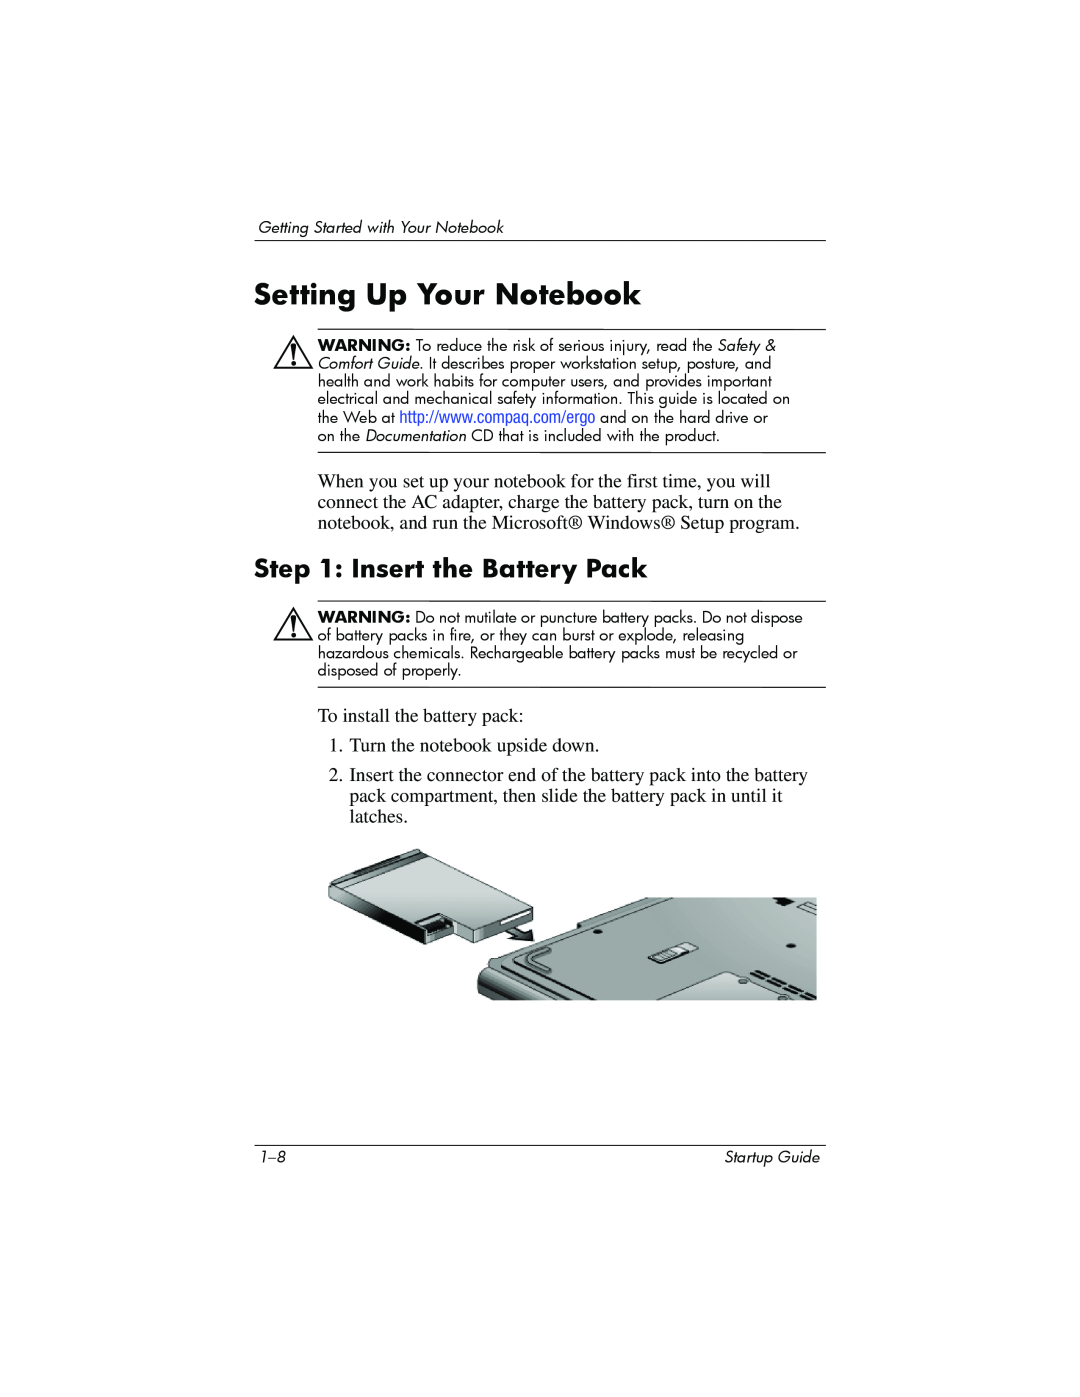 Compaq Personal Computer manual Setting Up Your Notebook, Insert the Battery Pack 